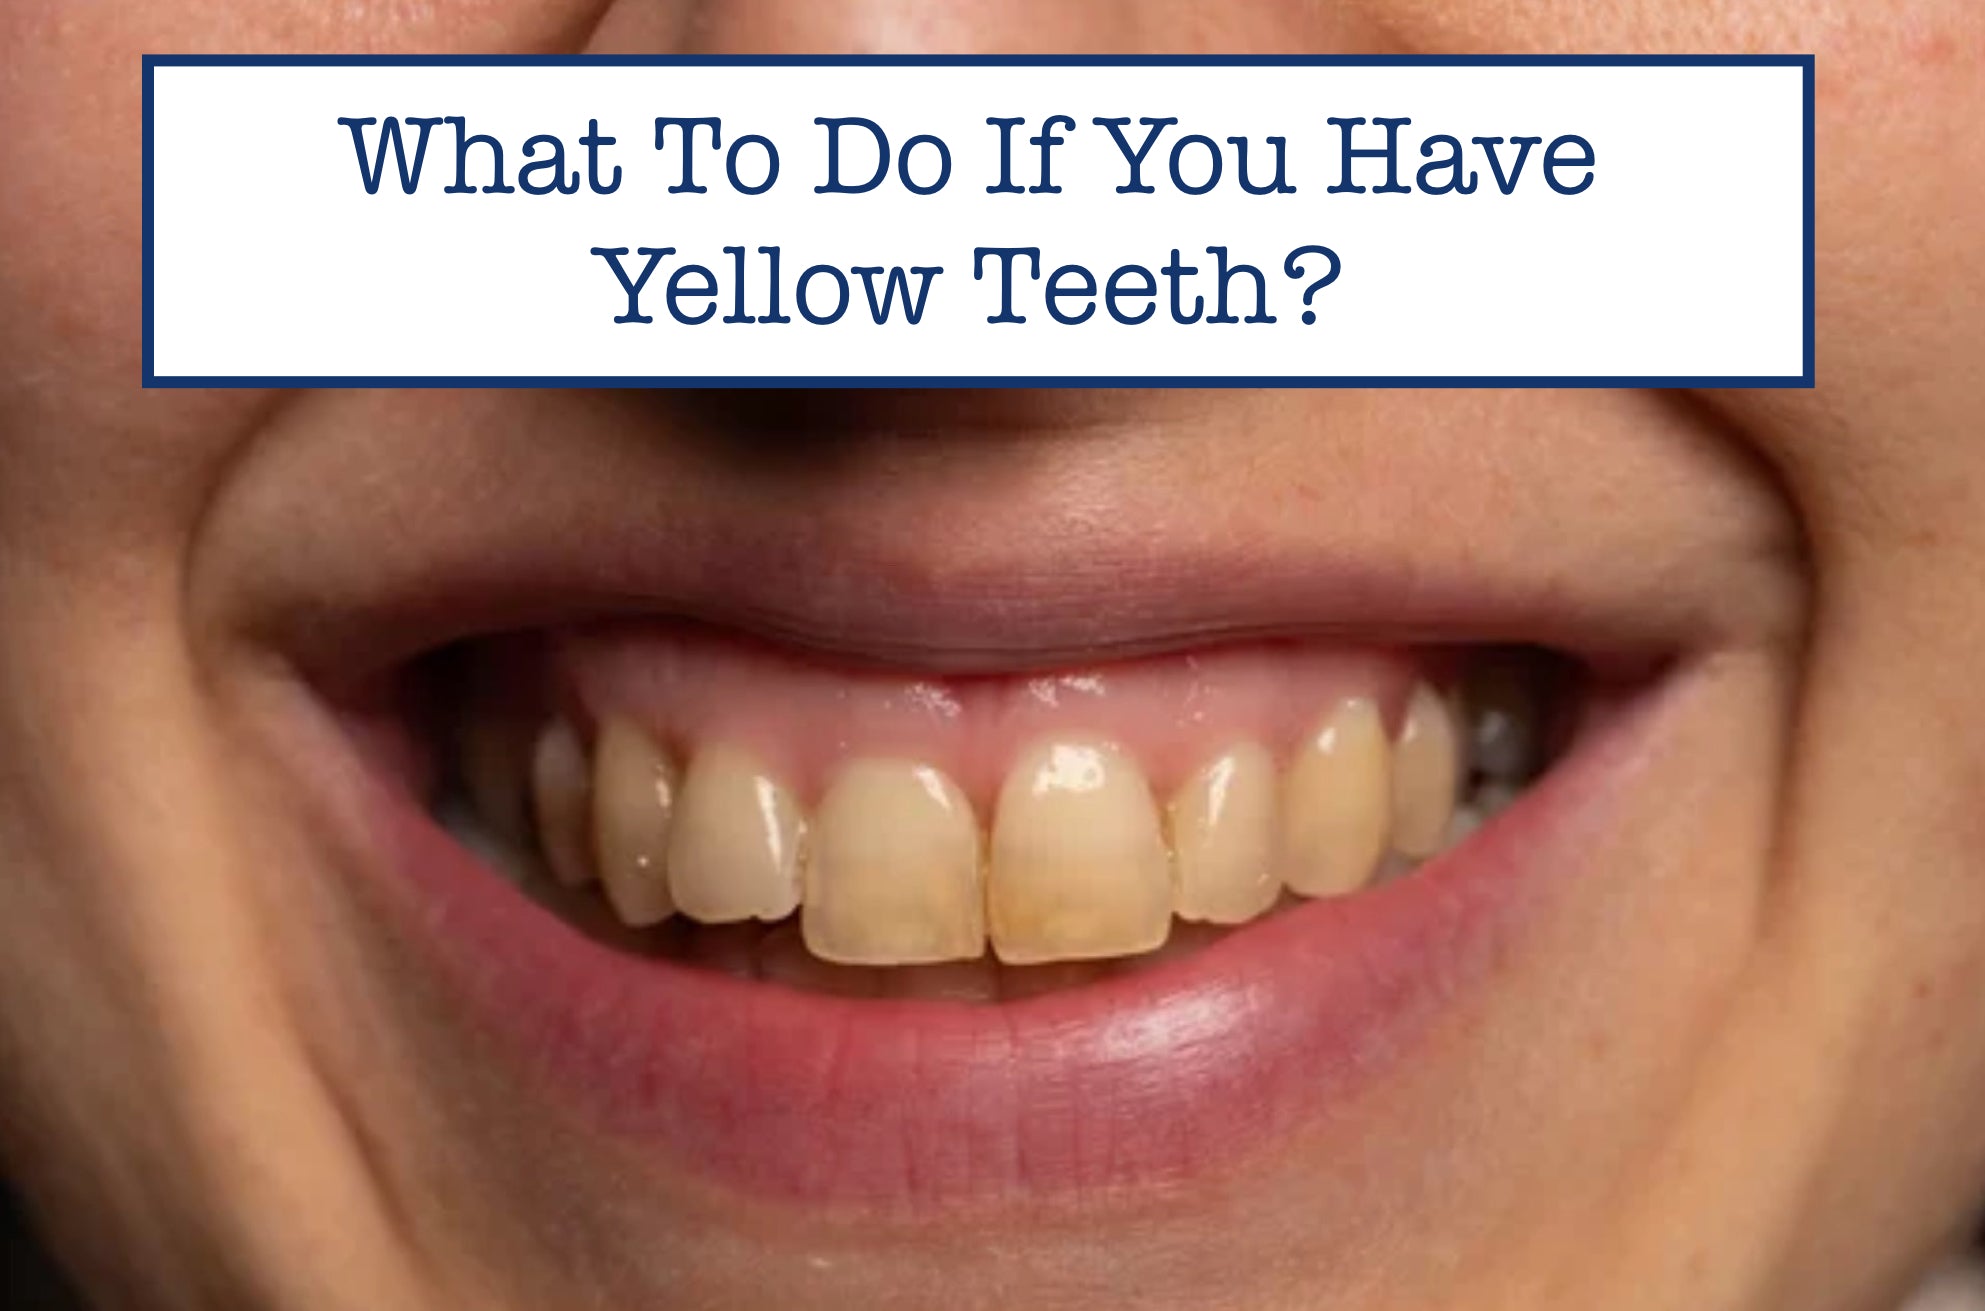 What To Do If You Have Yellow Teeth?